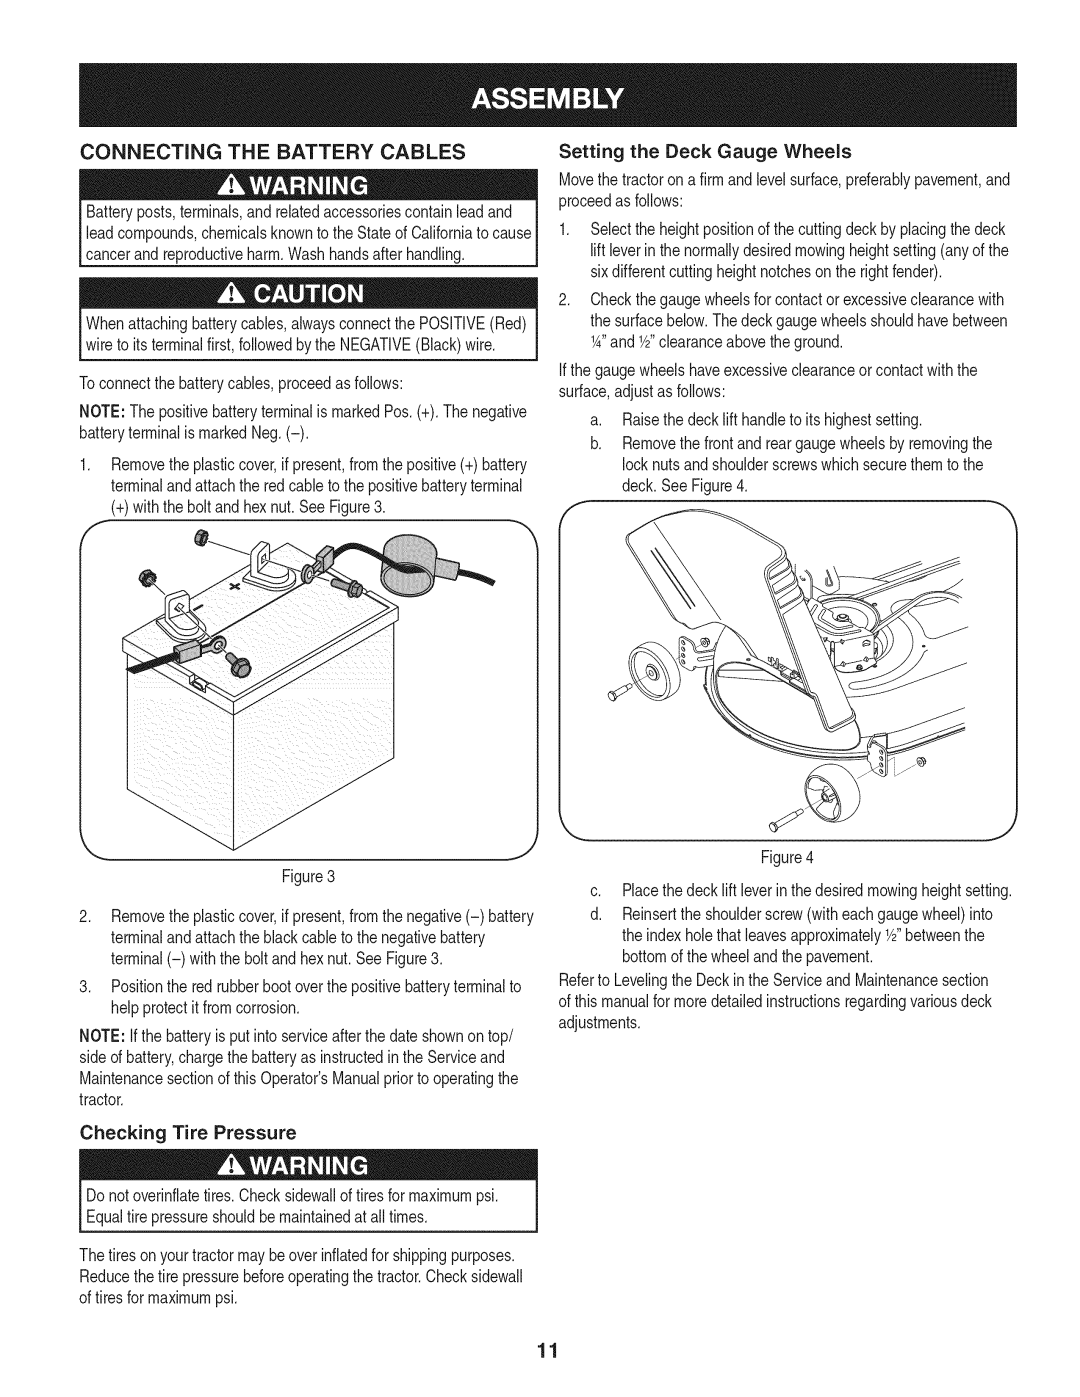 Craftsman 247.28672, PYT 9000 manual Connecting The Battery Cables, Checking Tire Pressure 